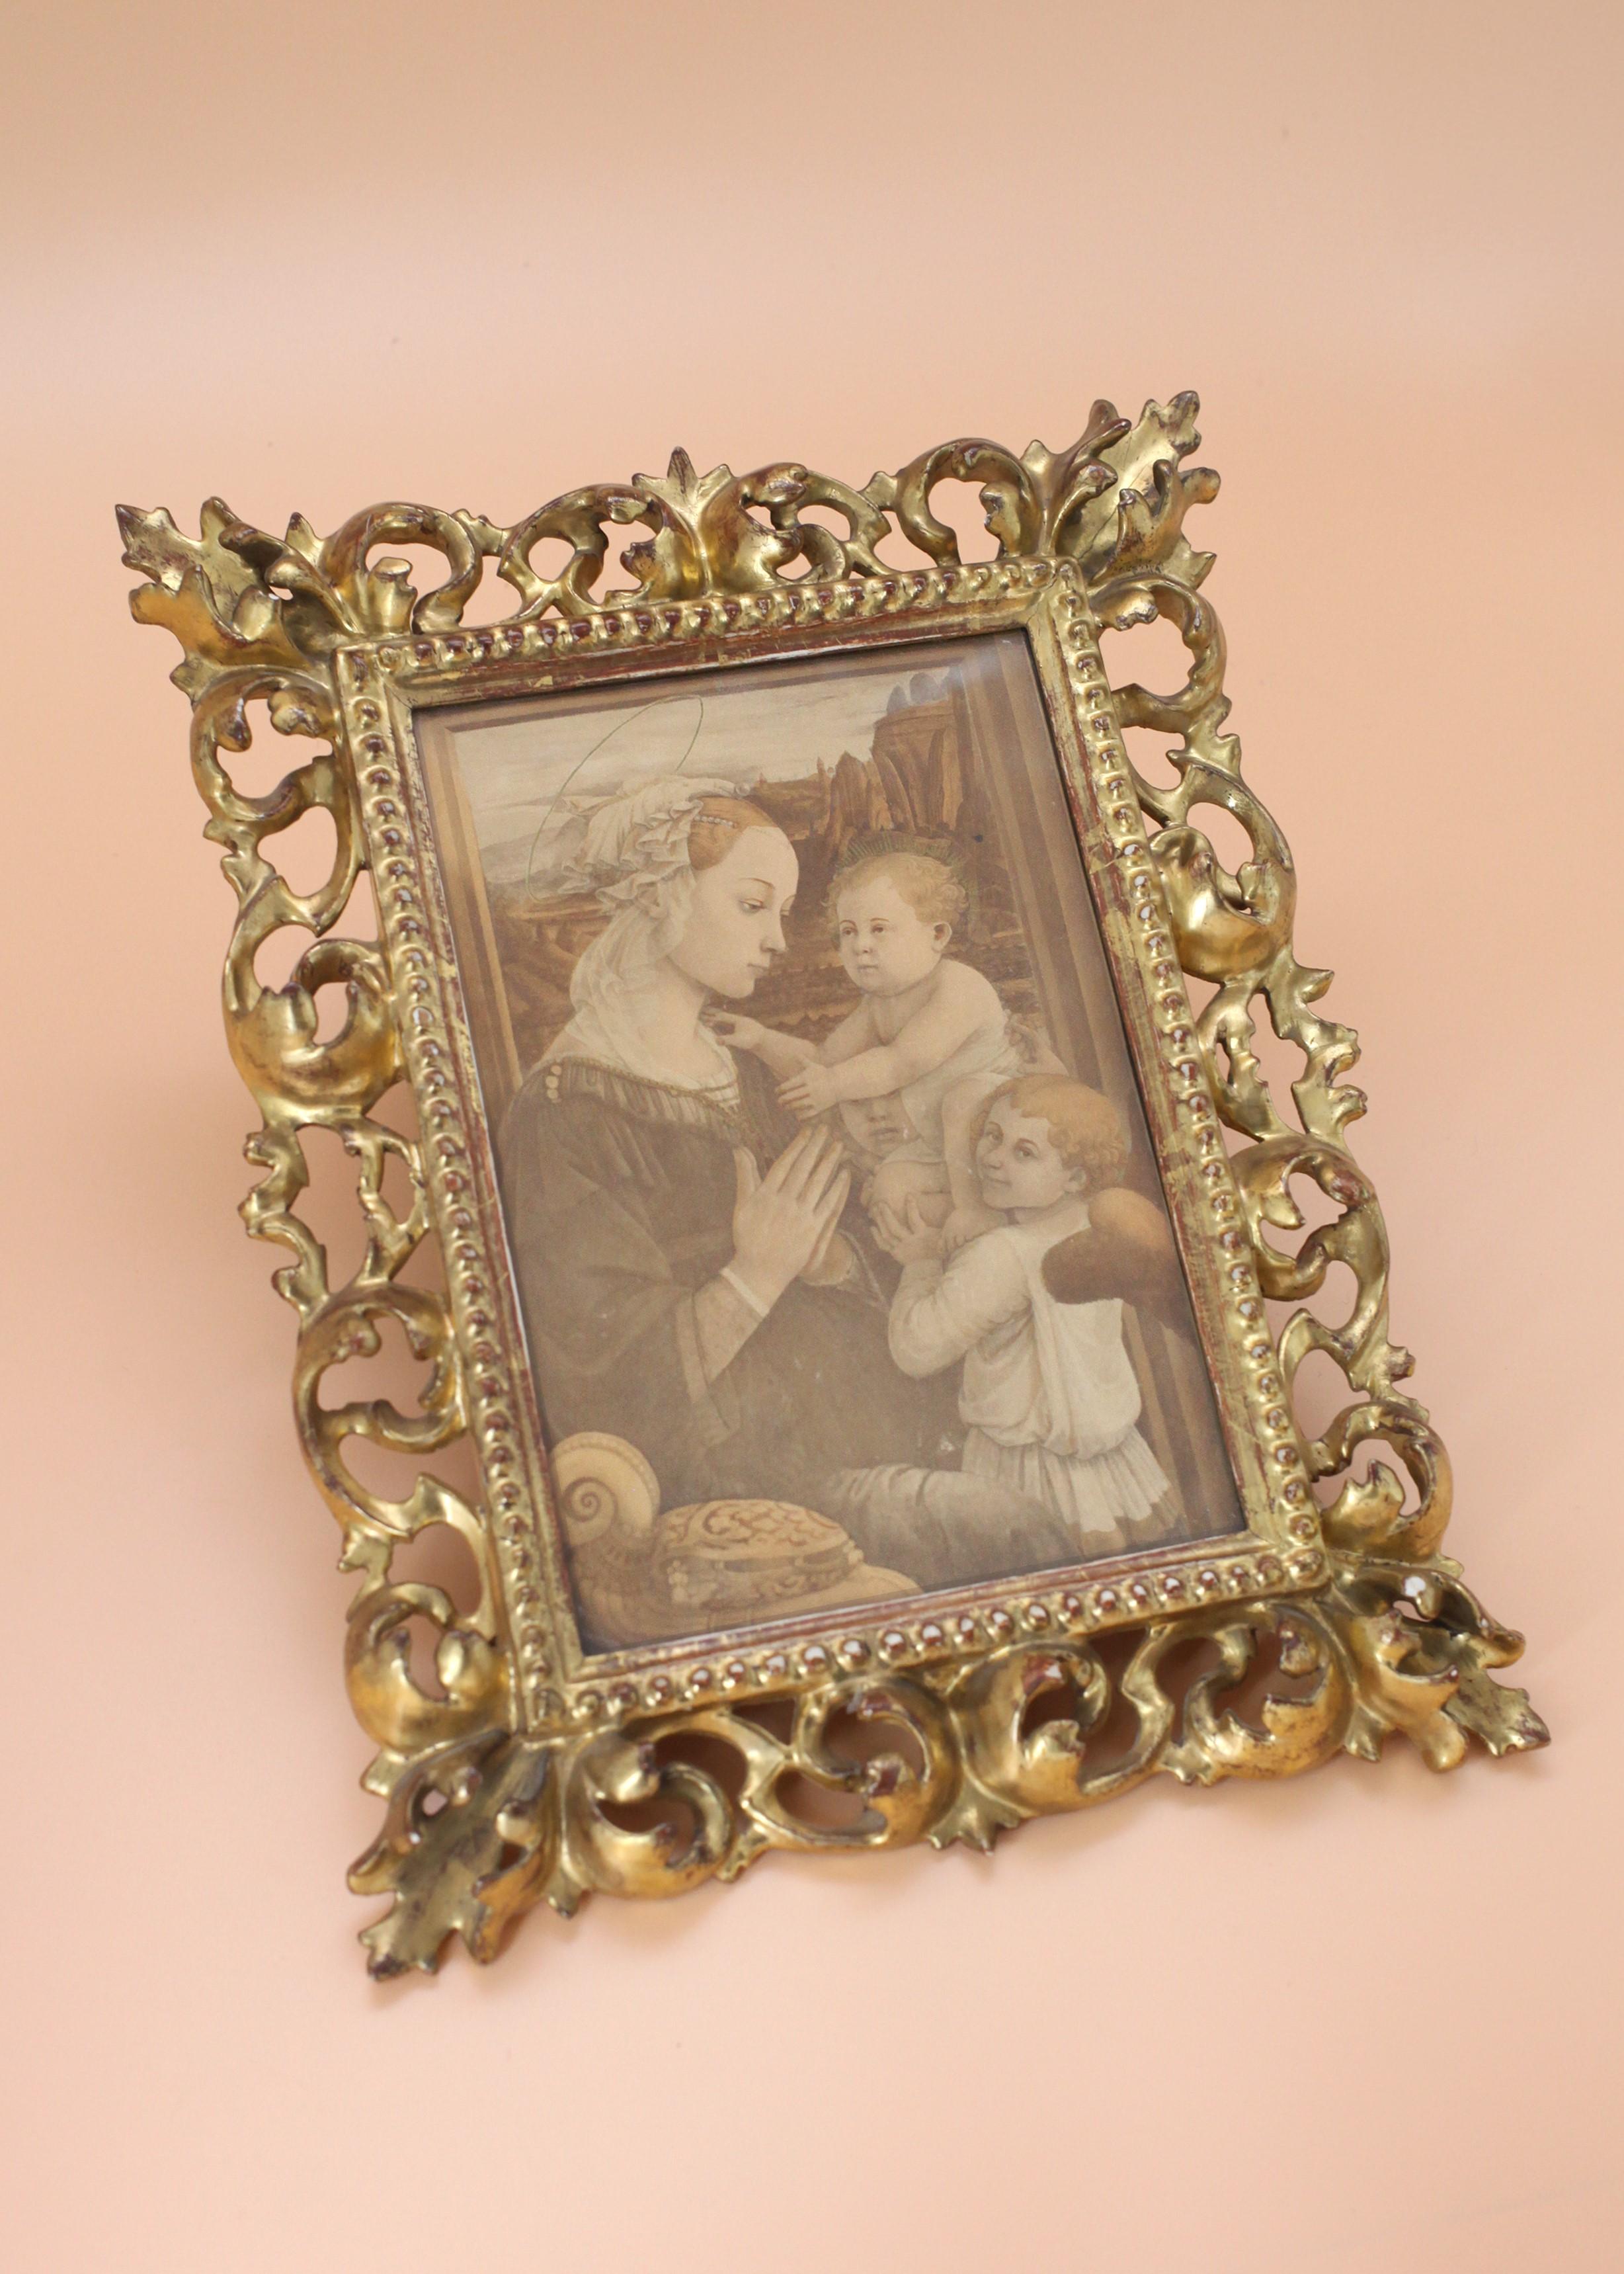 Evoking the lavish opulence of the 19th century, this Florentine Frame stands as a testament to the magnificence of the period's decorative arts. Its confident gold leaf application highlights its impressive aesthetics while demonstrating immense